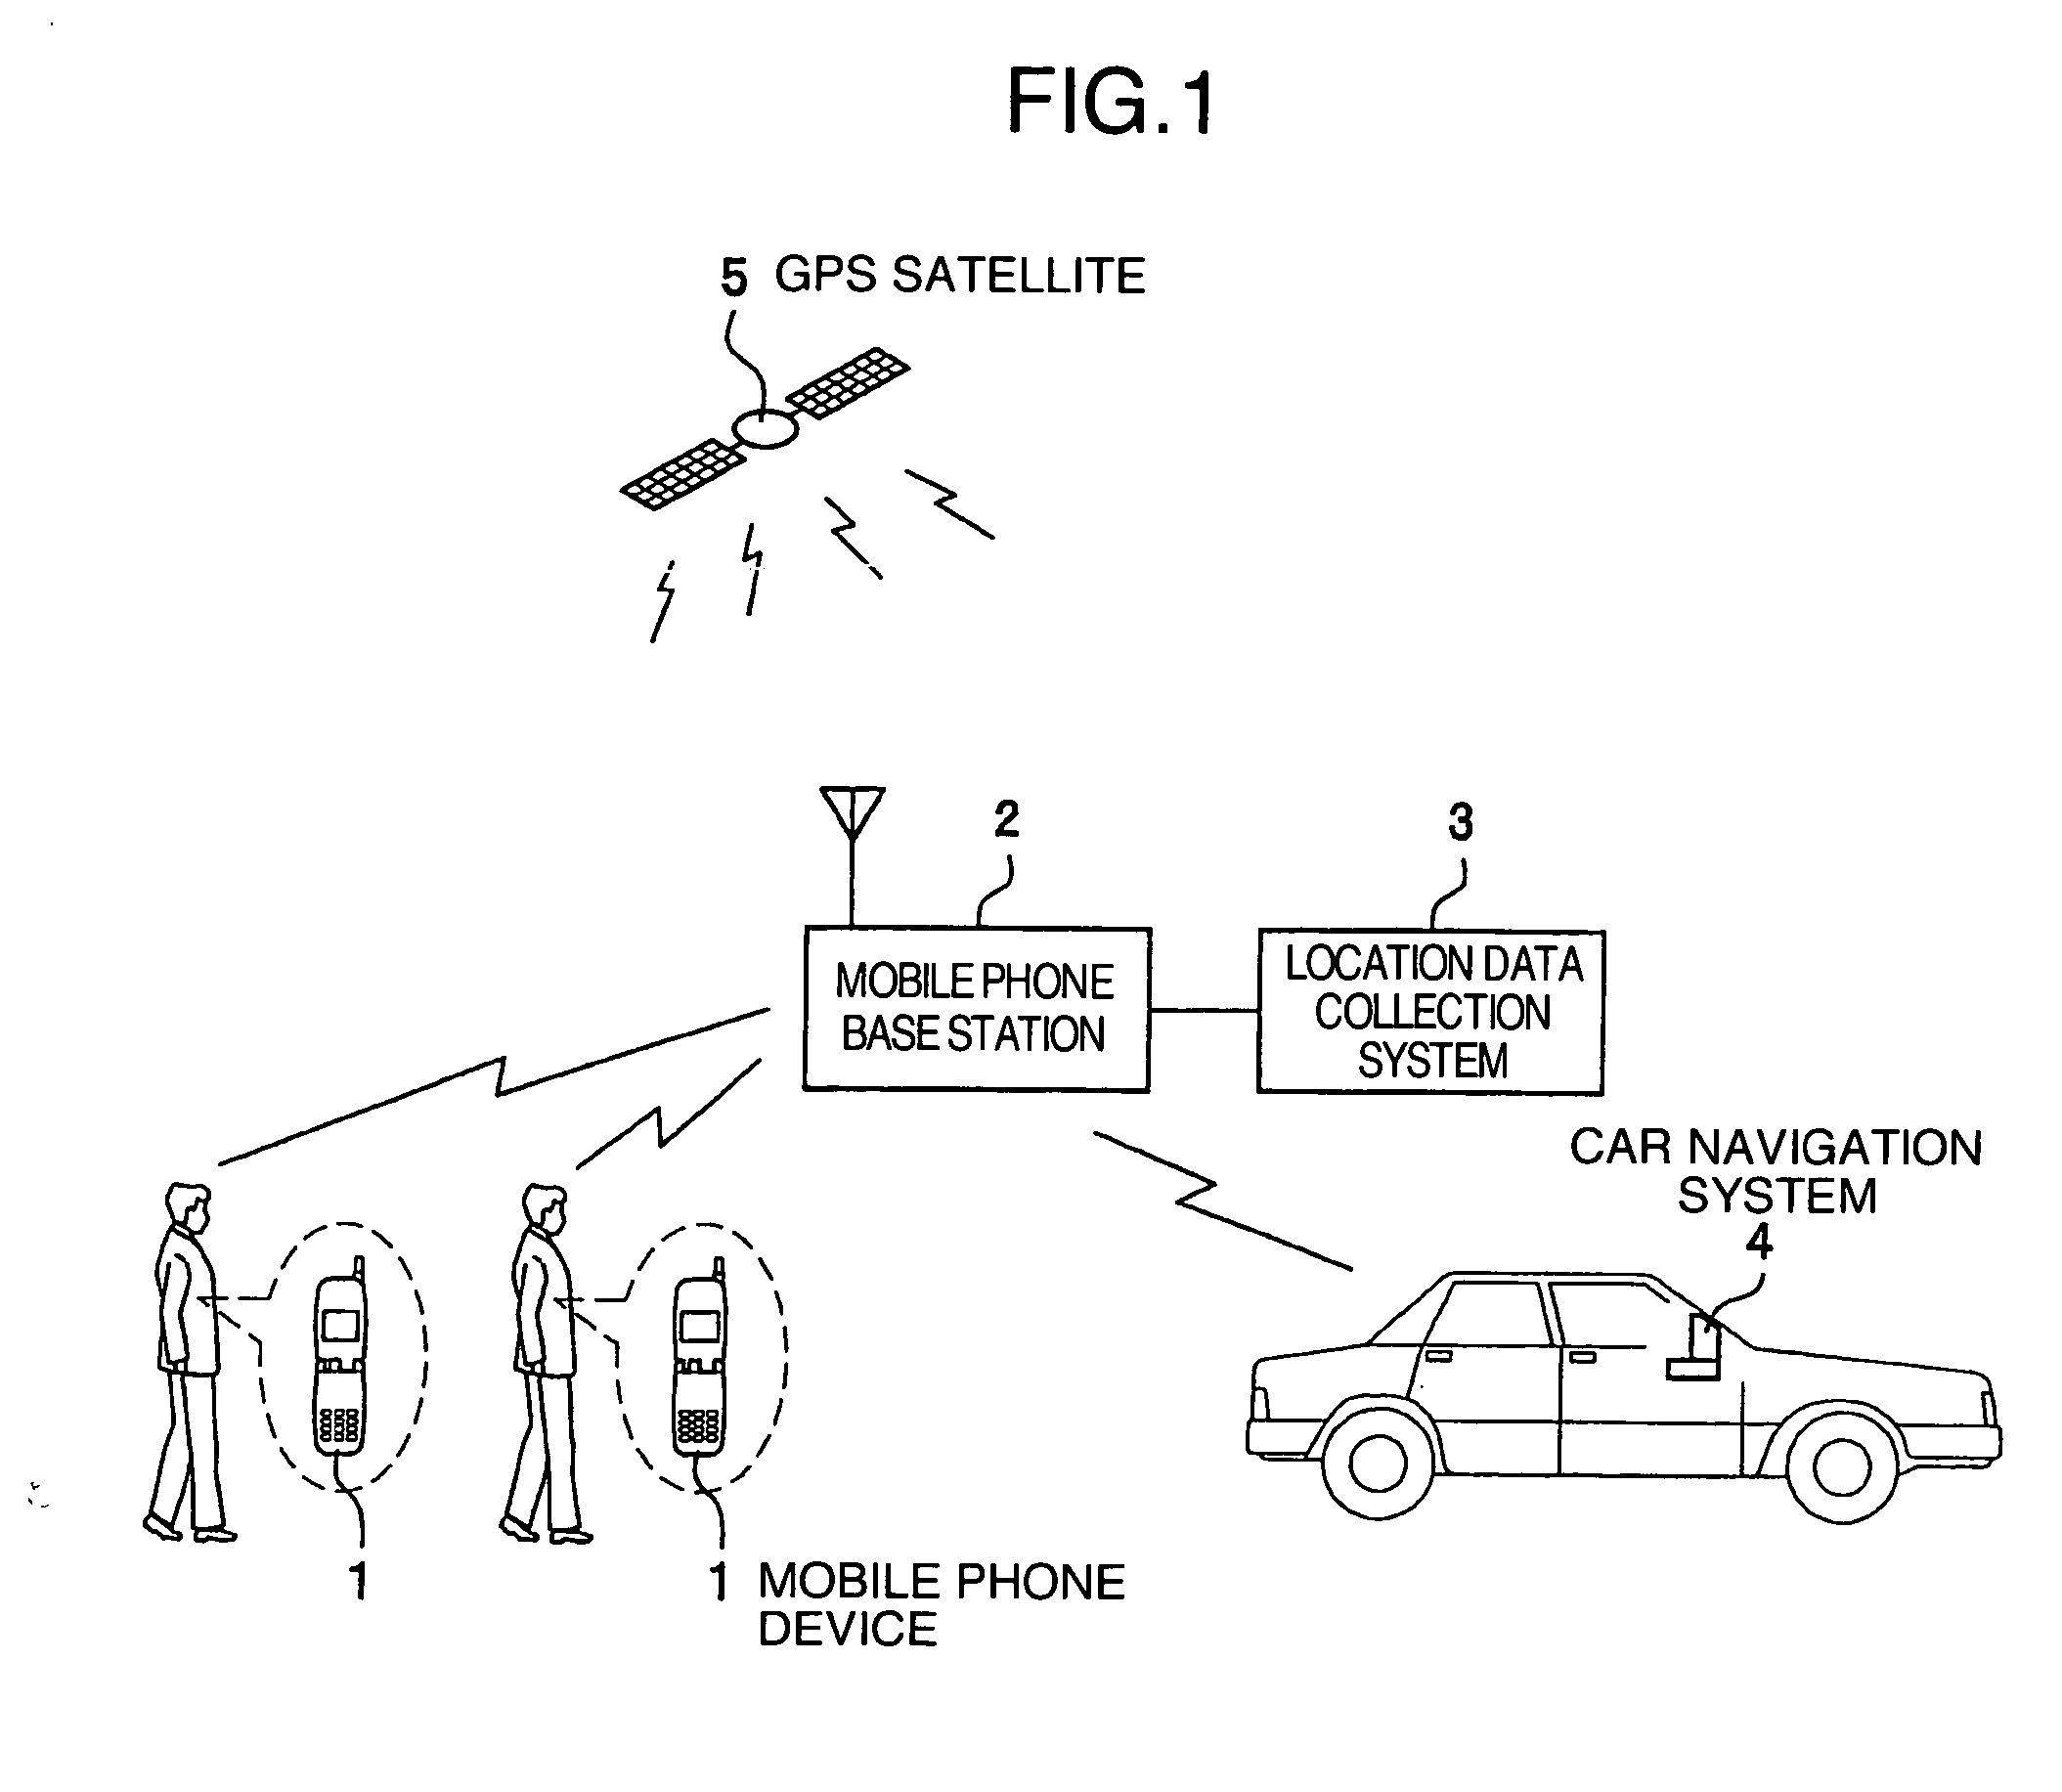 System and method for providing information of moving objects' states of move, location data collection system, and car navigation system